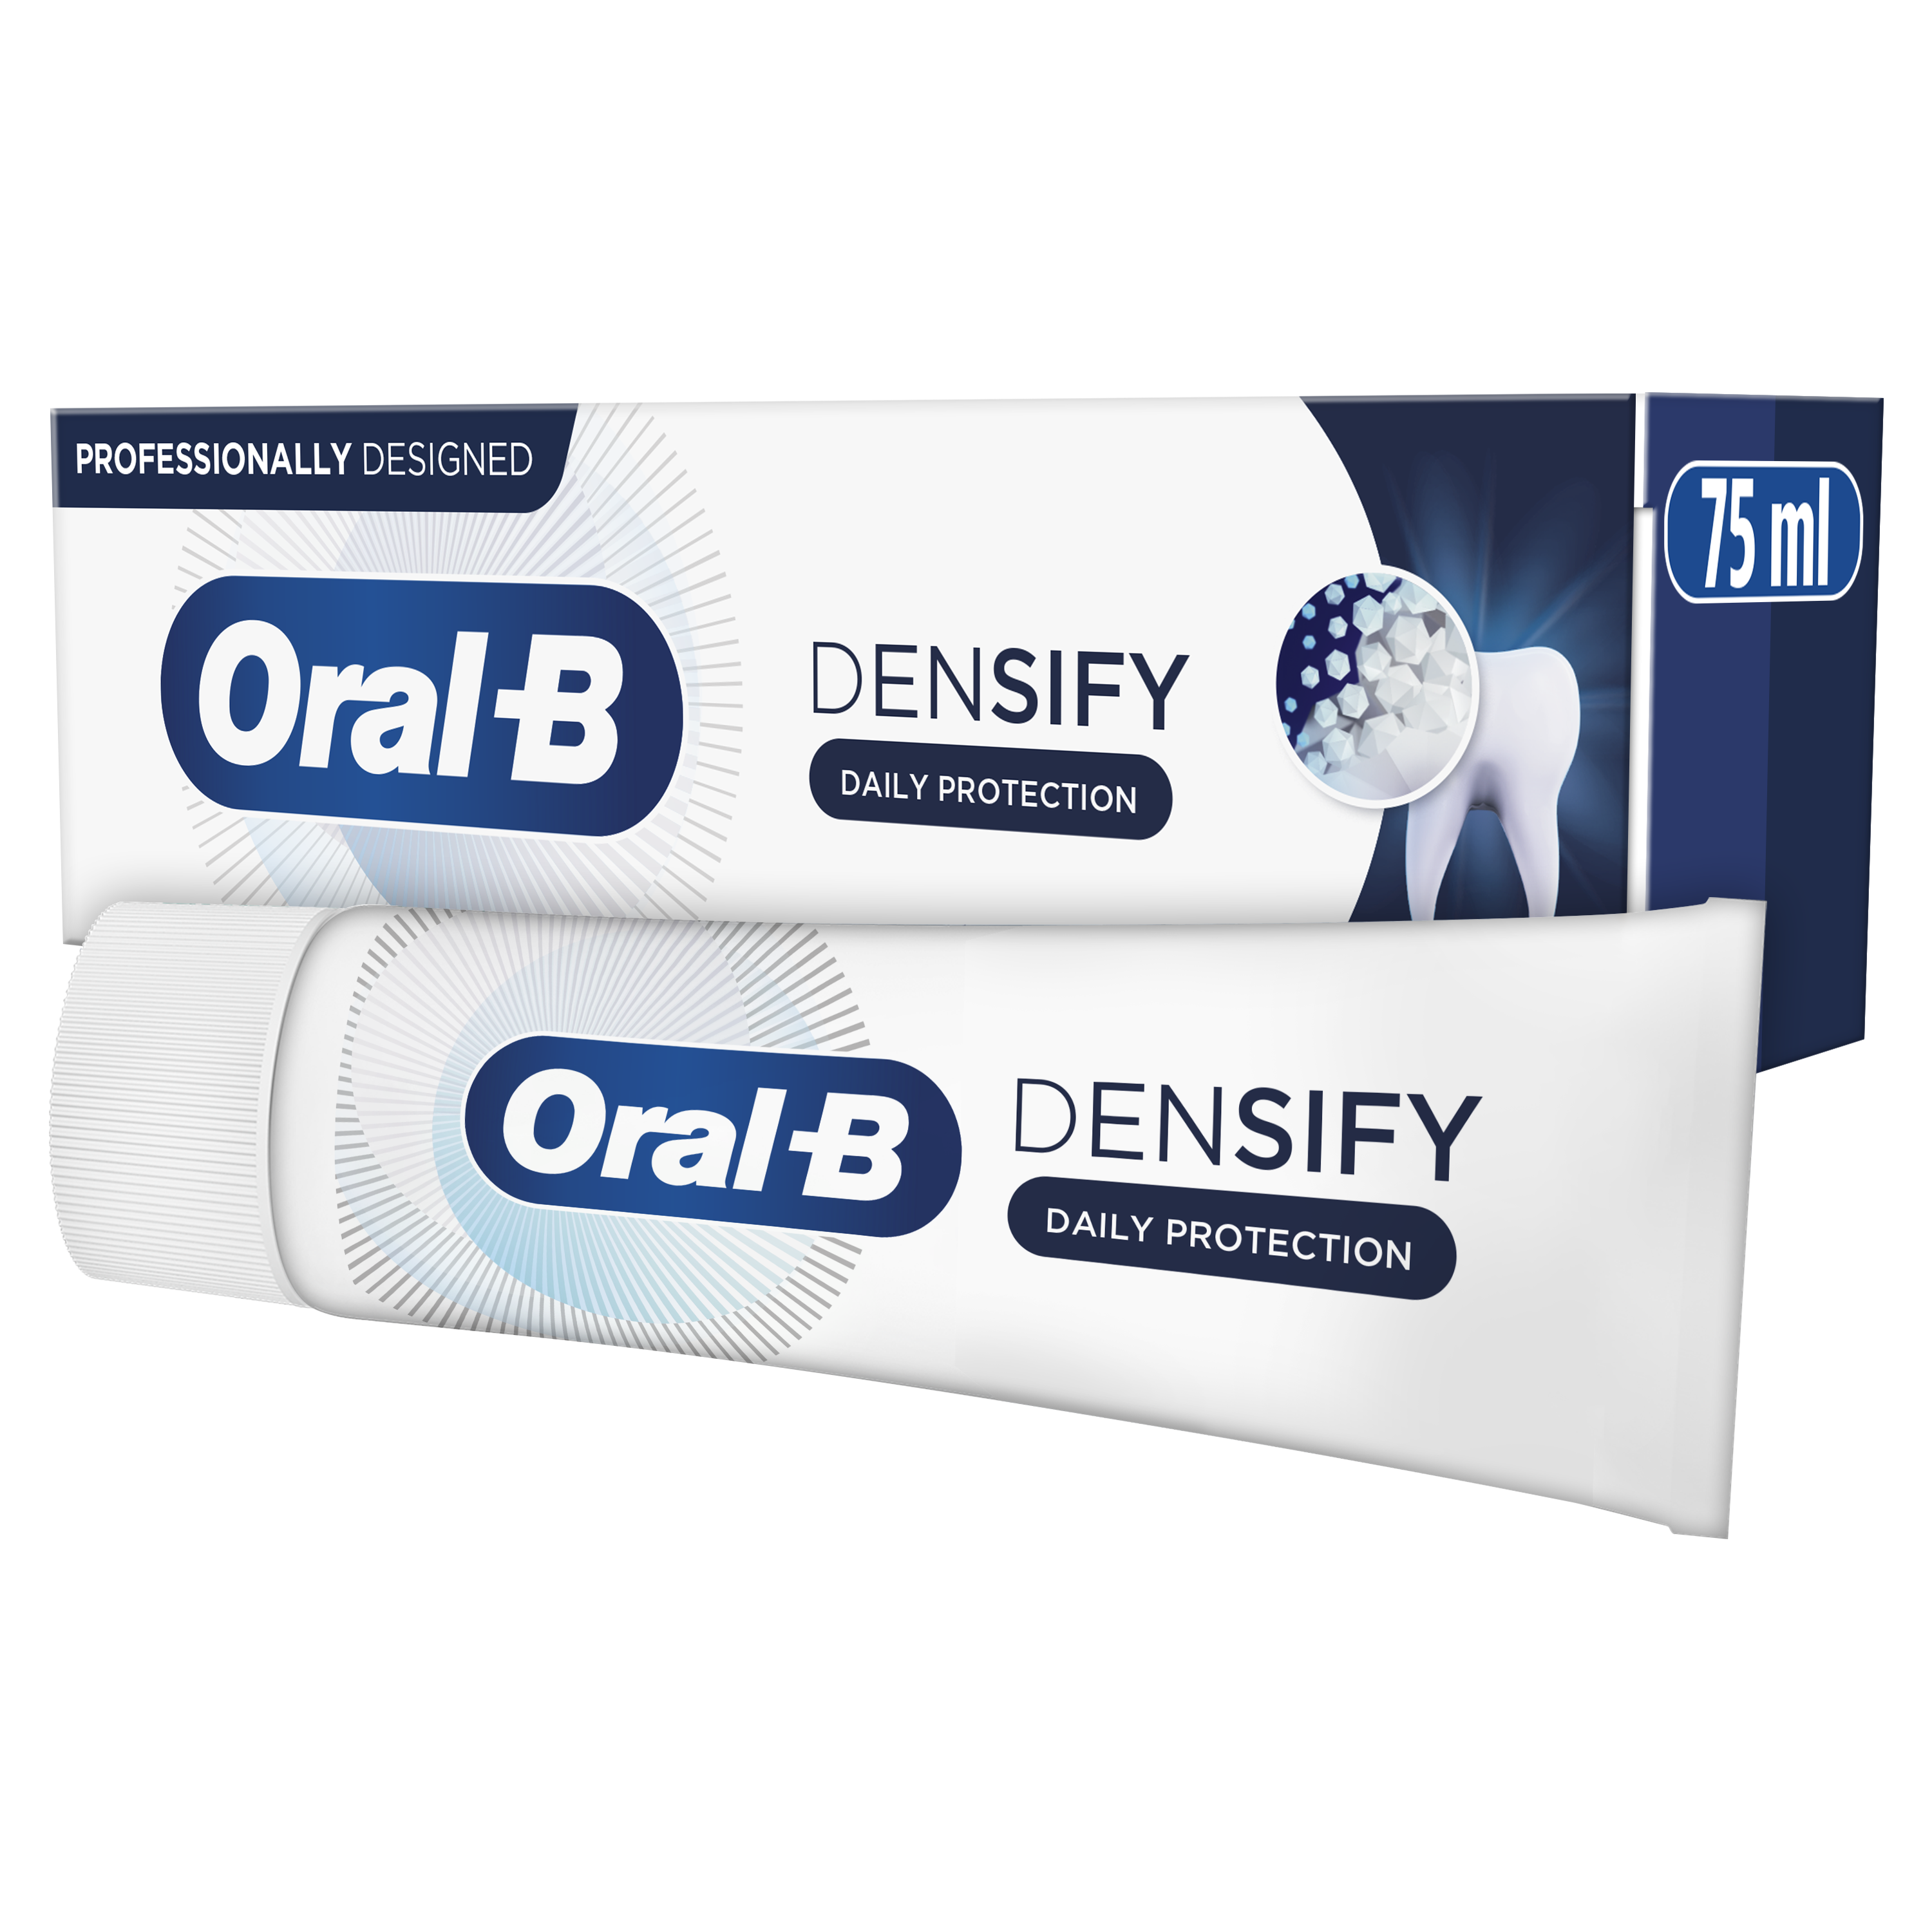 Oral-B Densify Daily Protection Toothpaste undefined